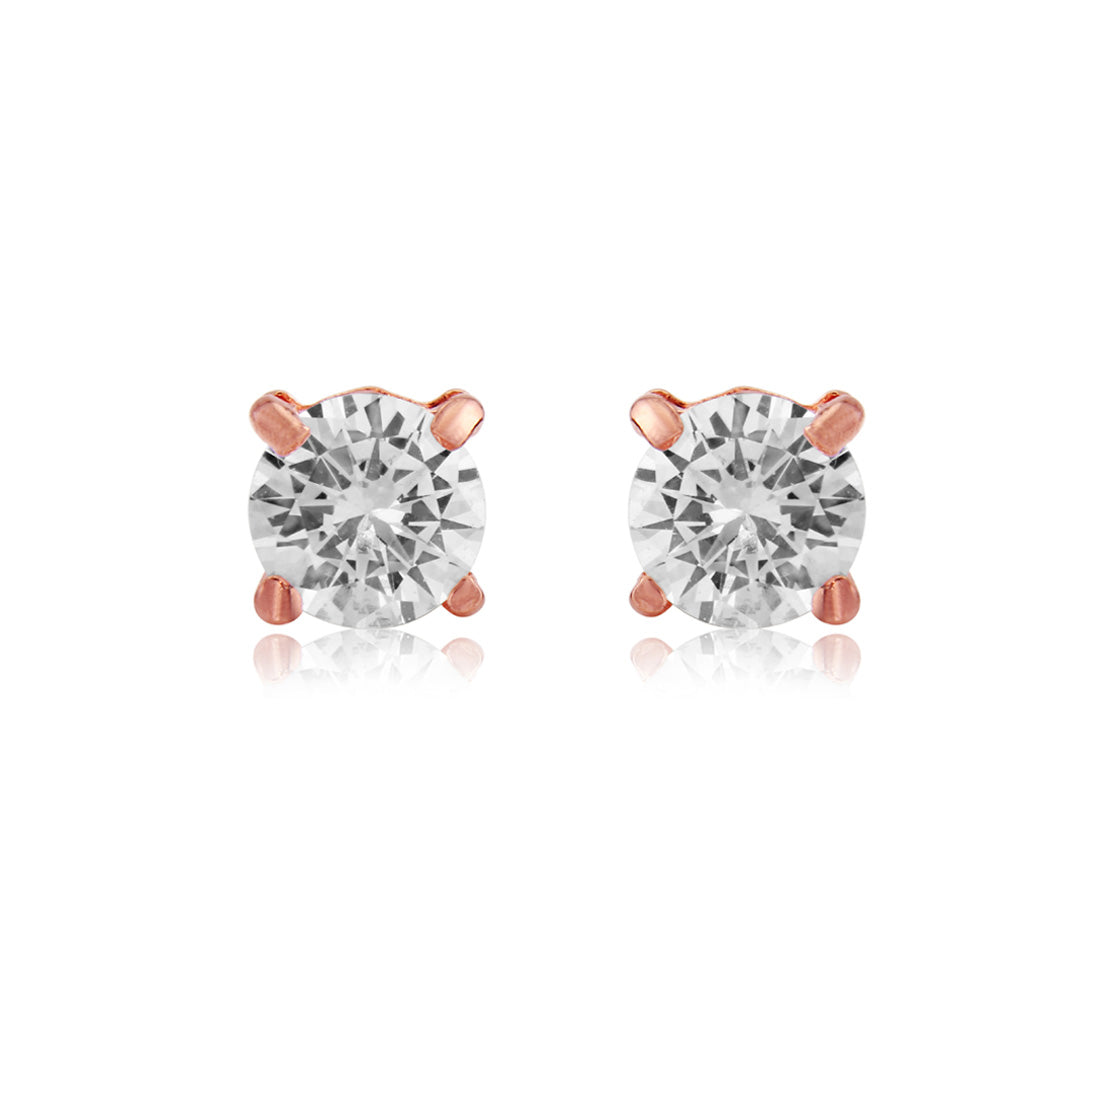 Hint of Rose Gold Cubic Zirconia Crystal Stud Earrings